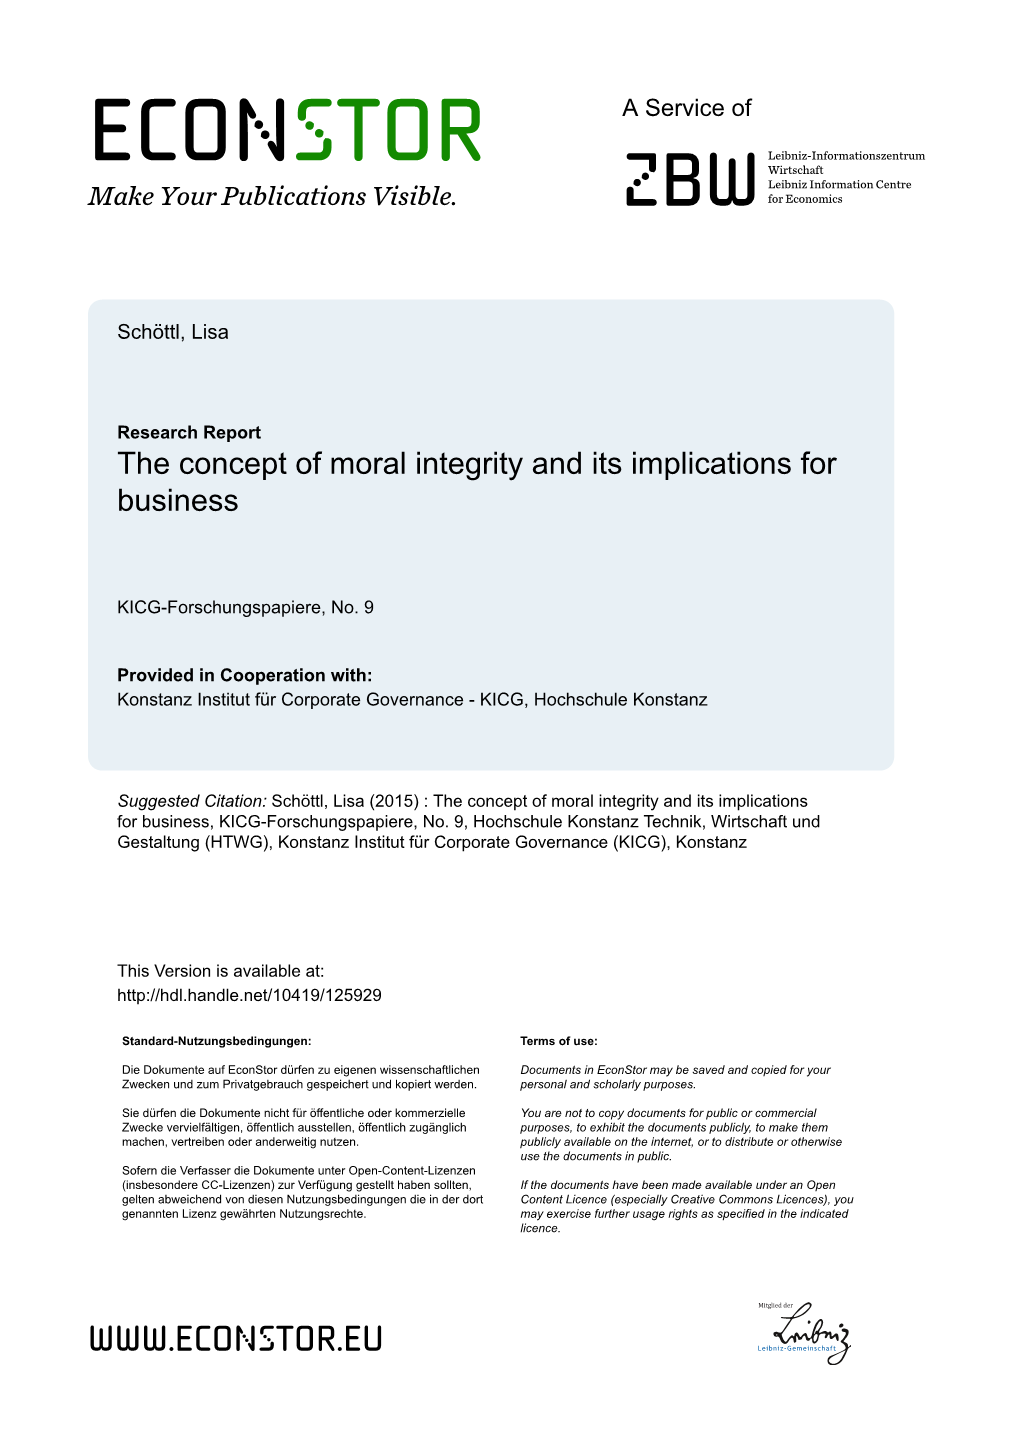 The Concept of Moral Integrity and Its Implications for Business